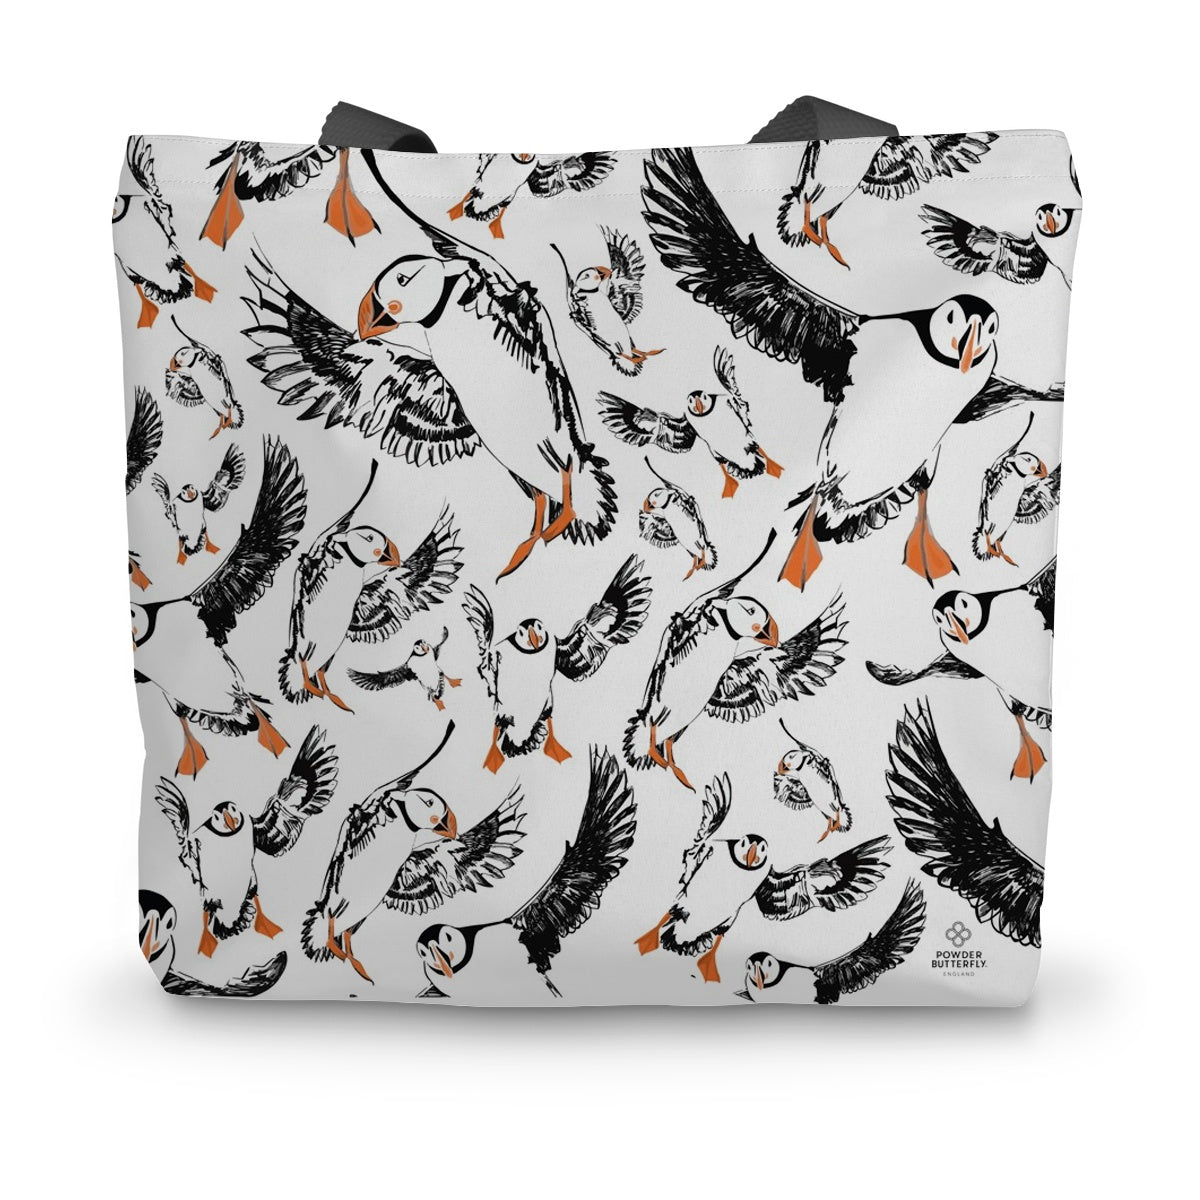 Shopping Tote with print featuring Puffins - Powder Butterfly